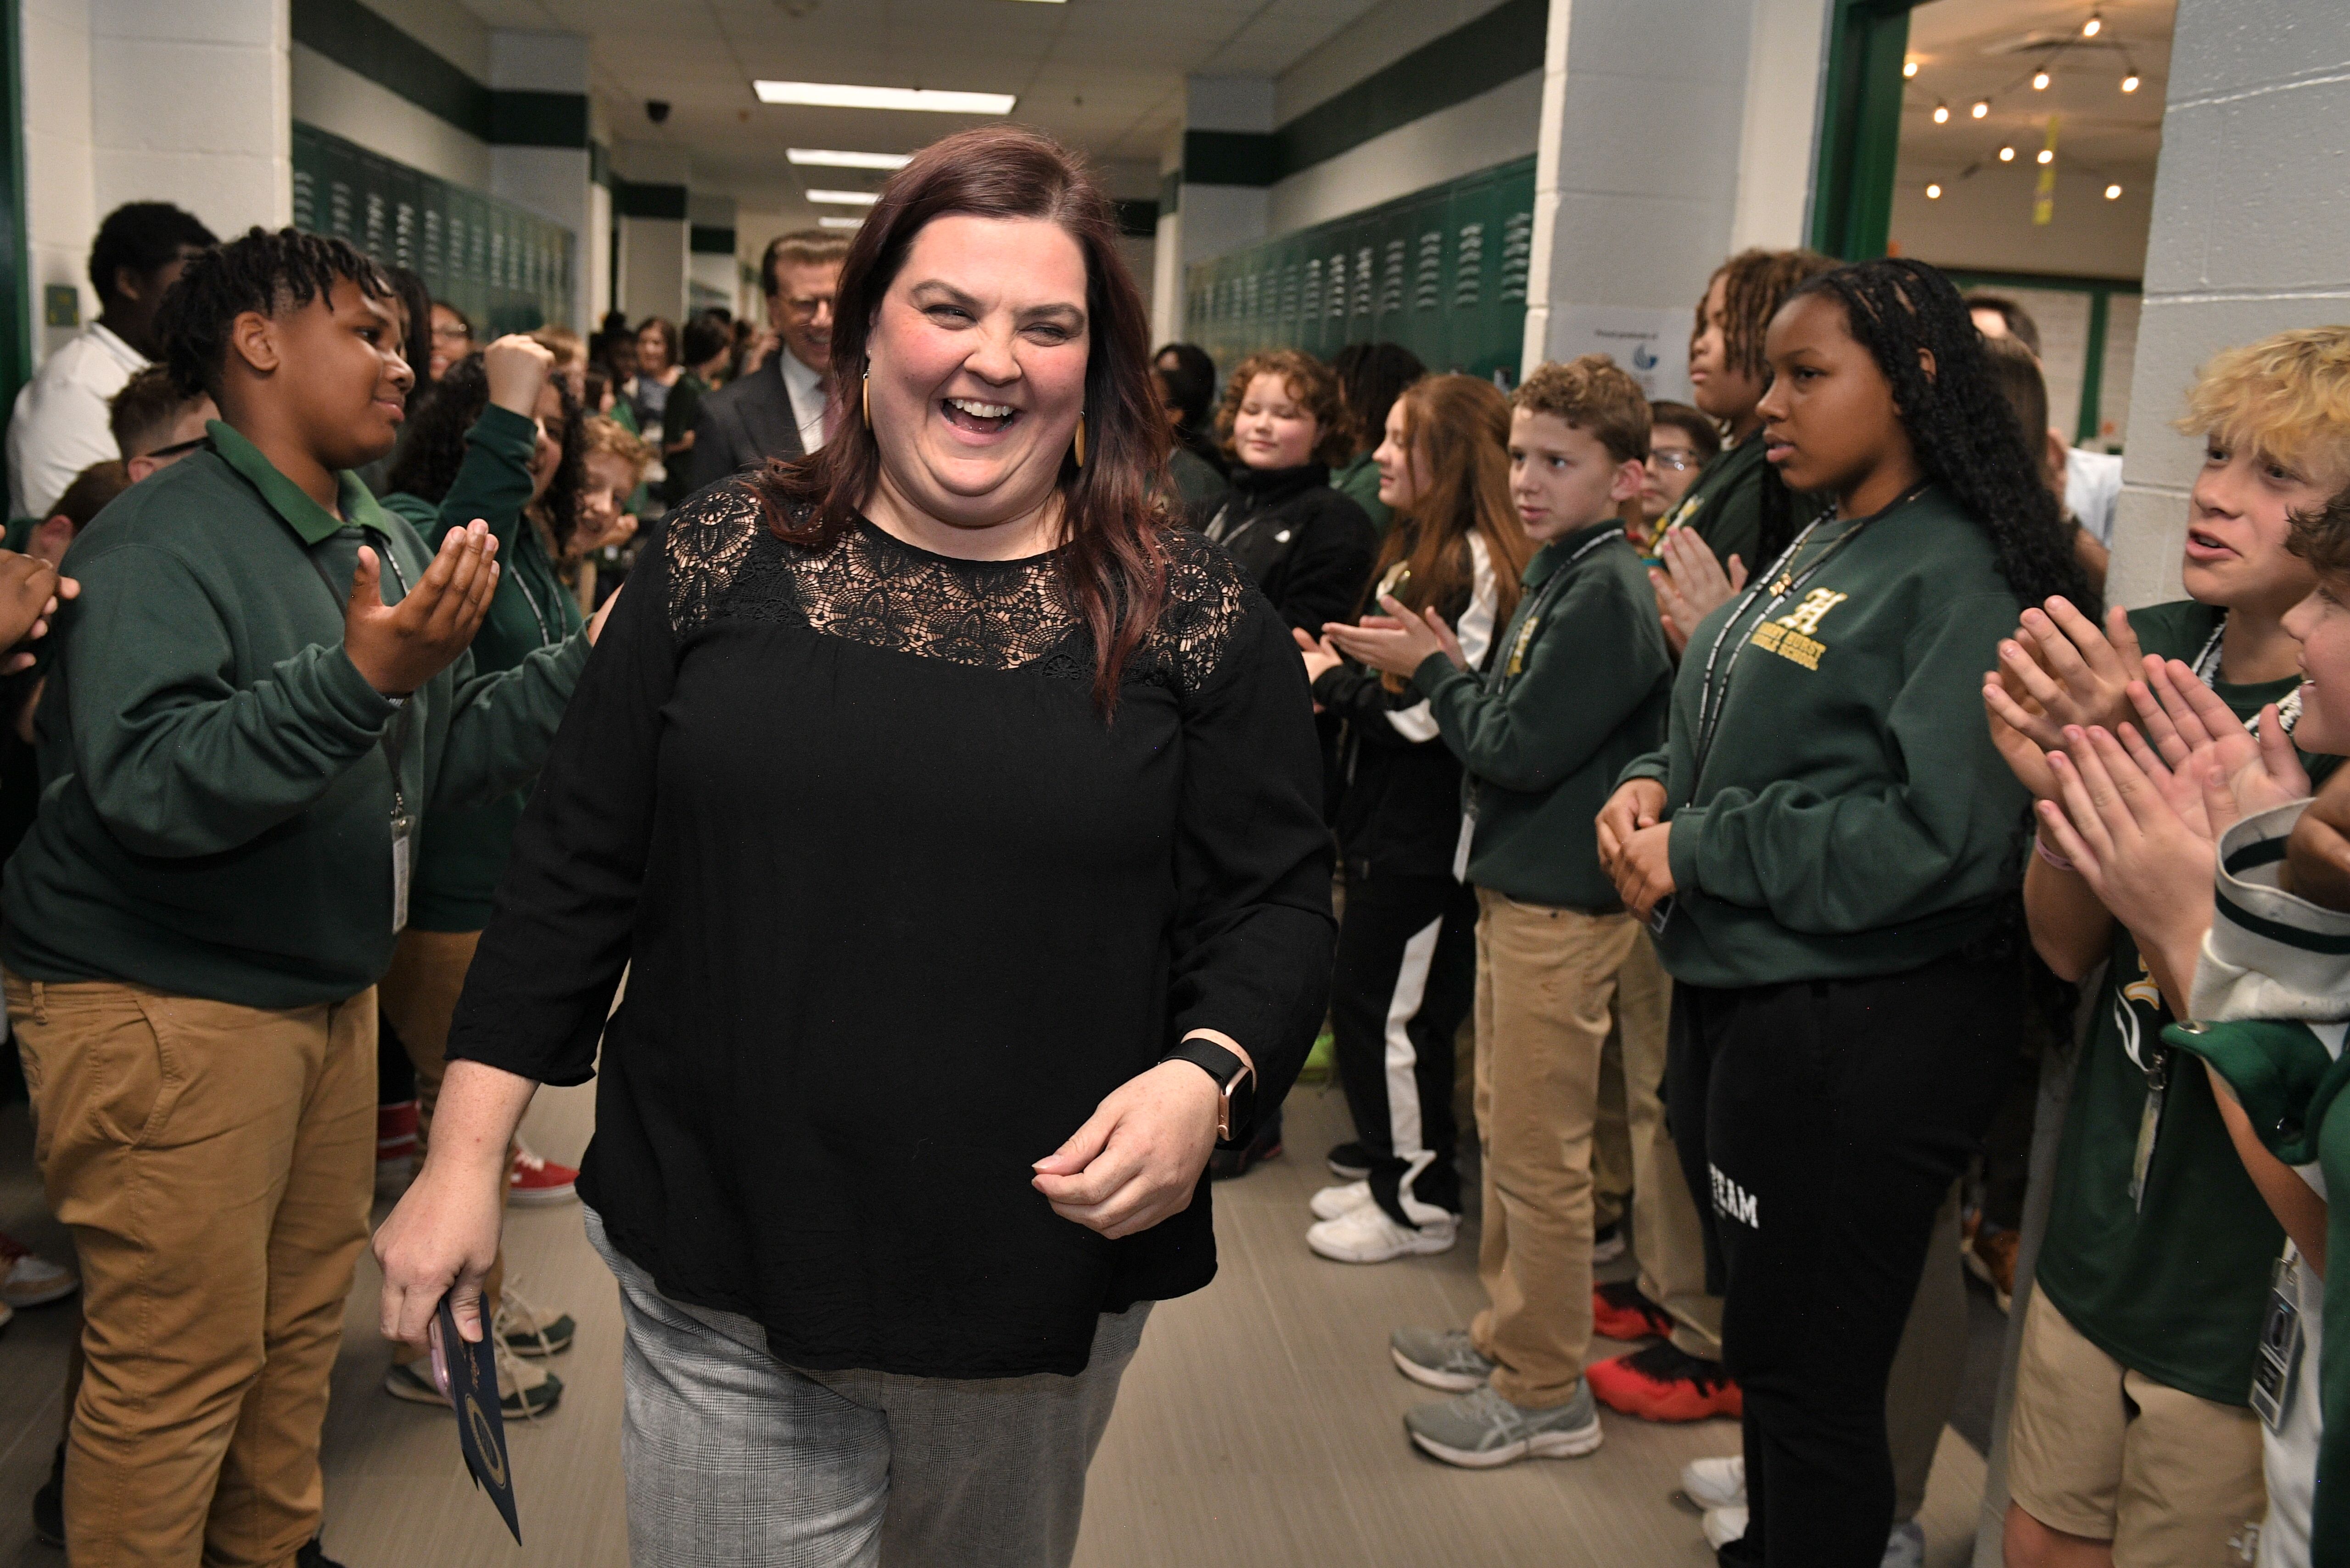 Photo shows Lauren Waguespack smiling in a school hallway with students